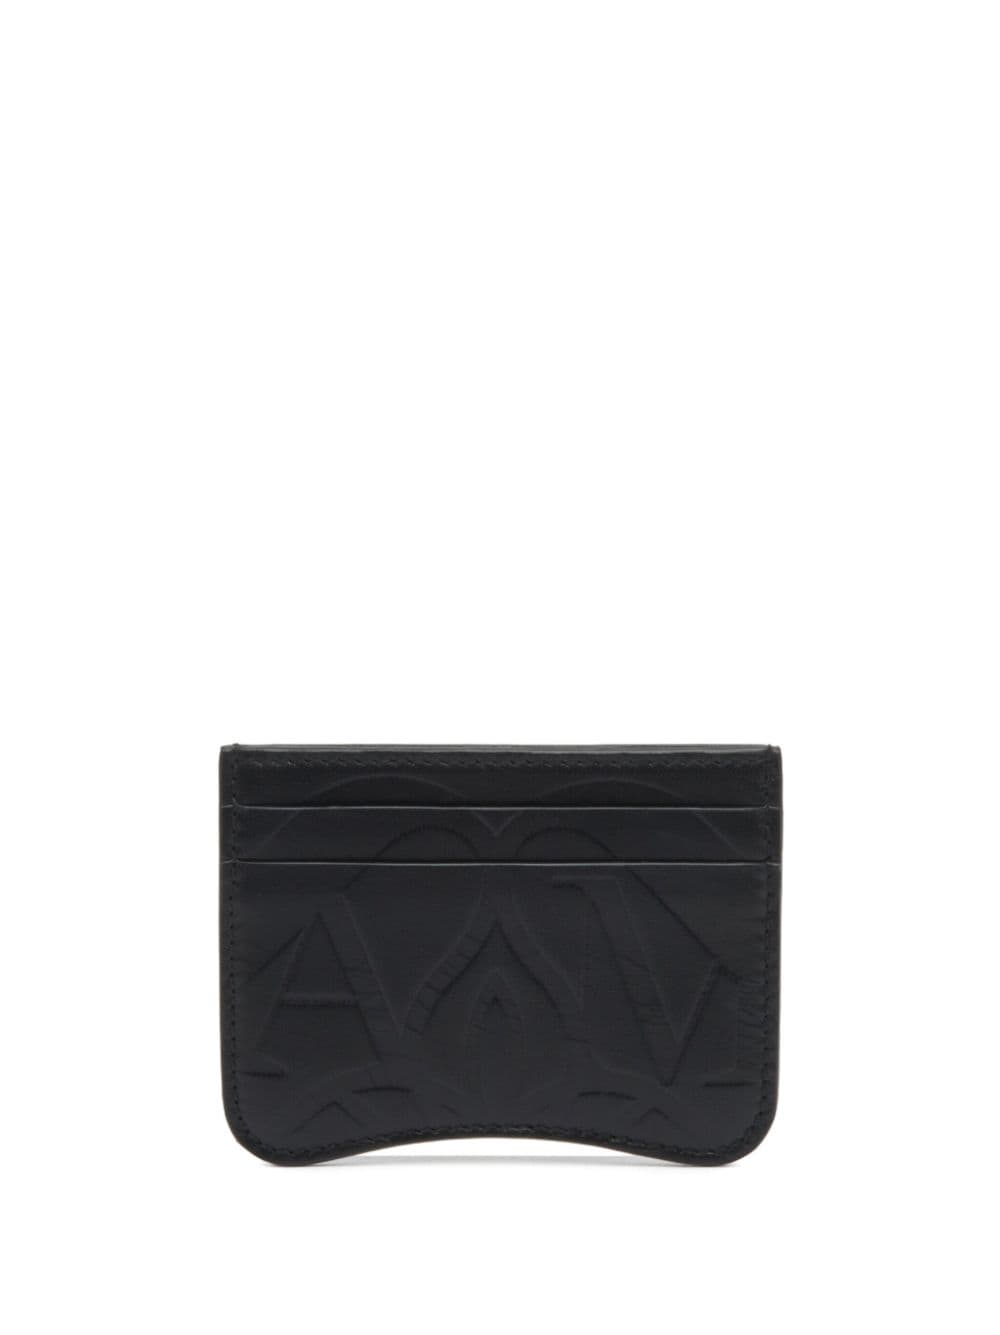 The Seal leather card holder<BR/><BR/><BR/>